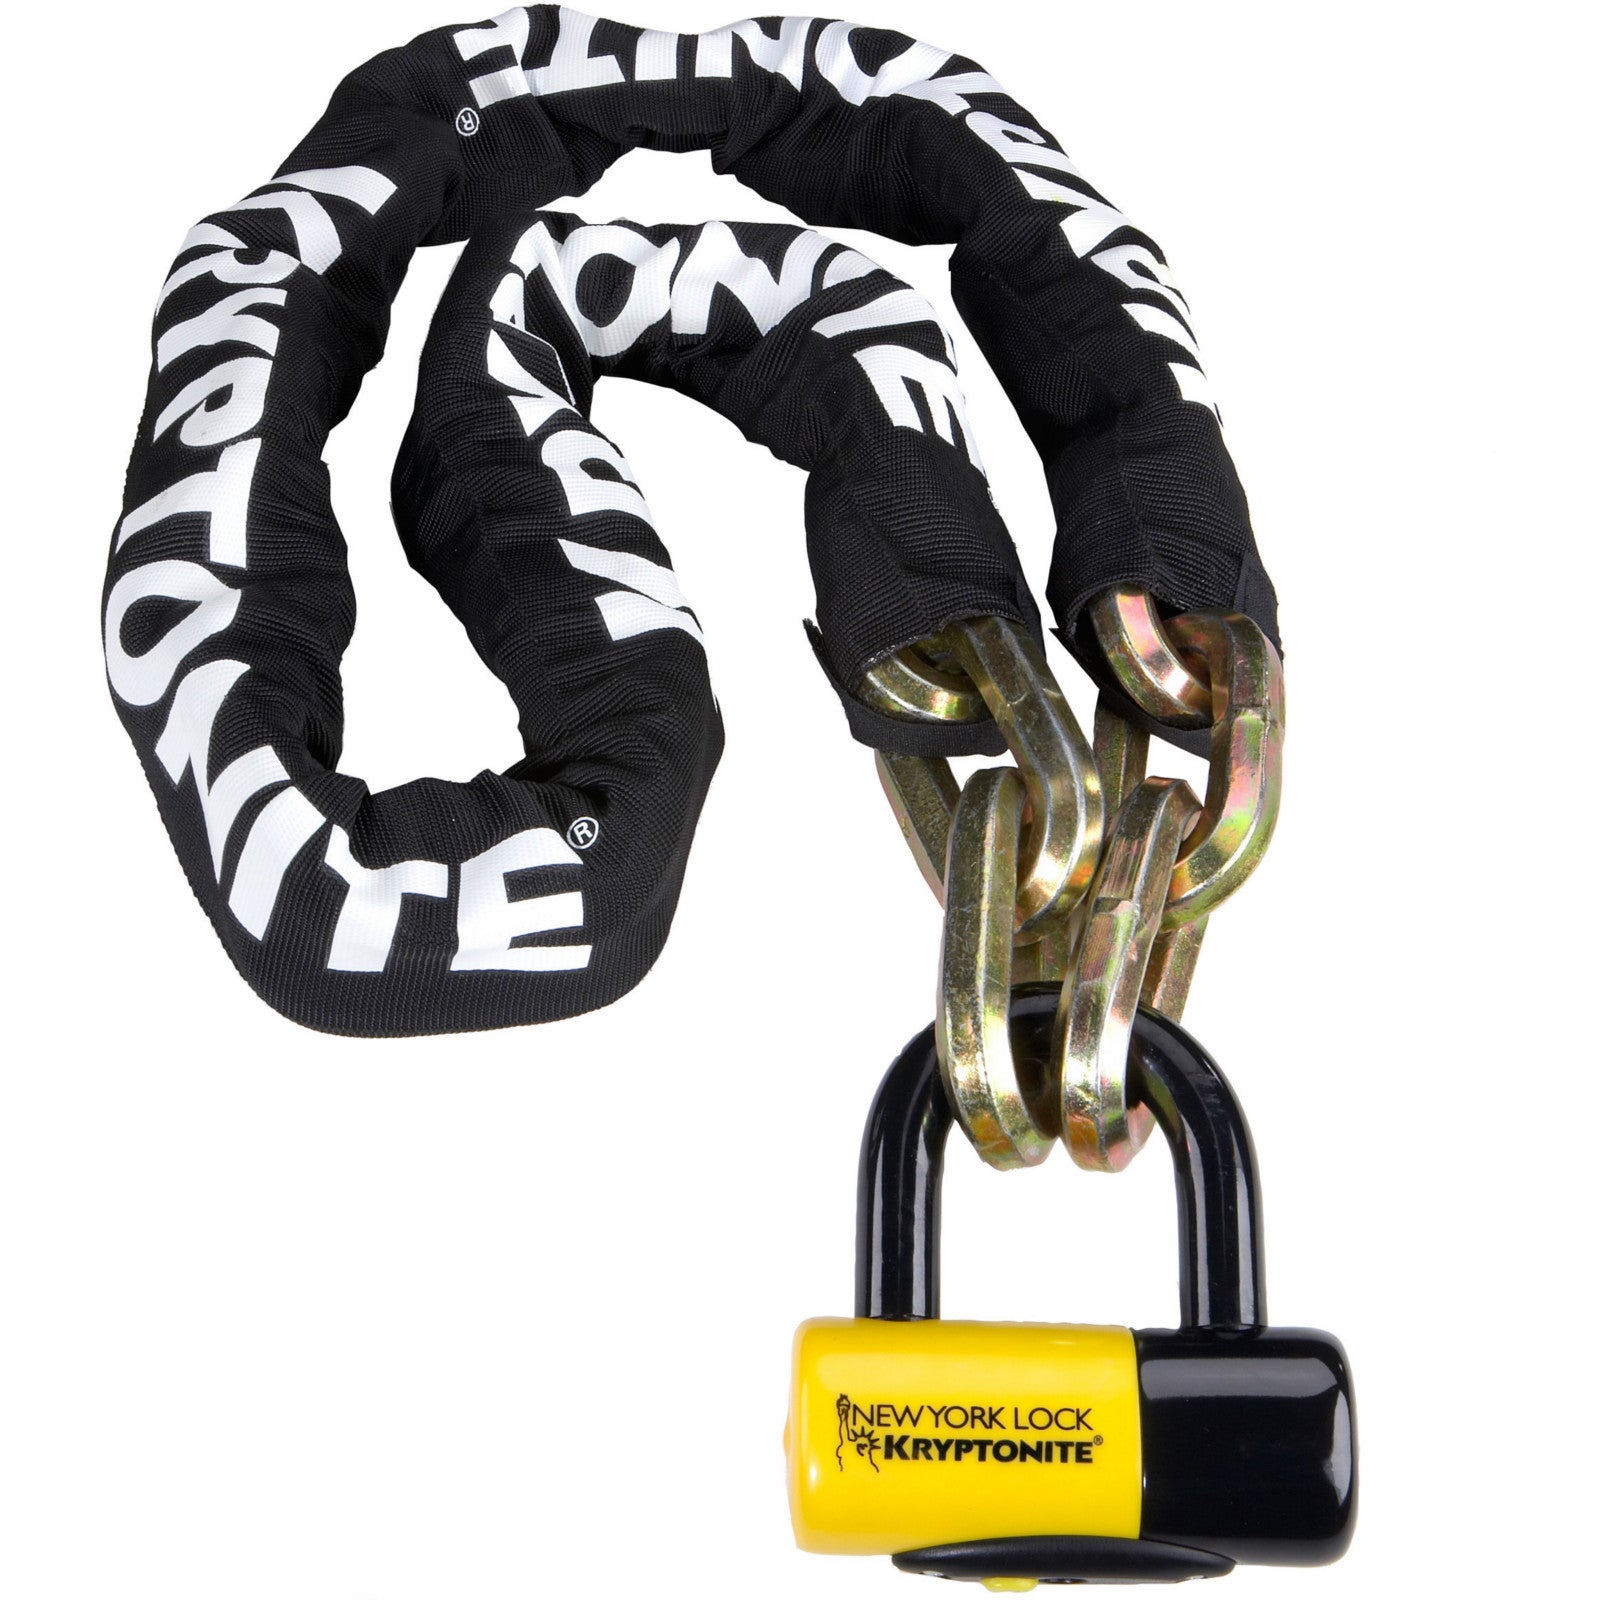 Kryptonite New York Fahgettaboudit 1410 14mm 150cm Bike Chain Lock With NY Shackle